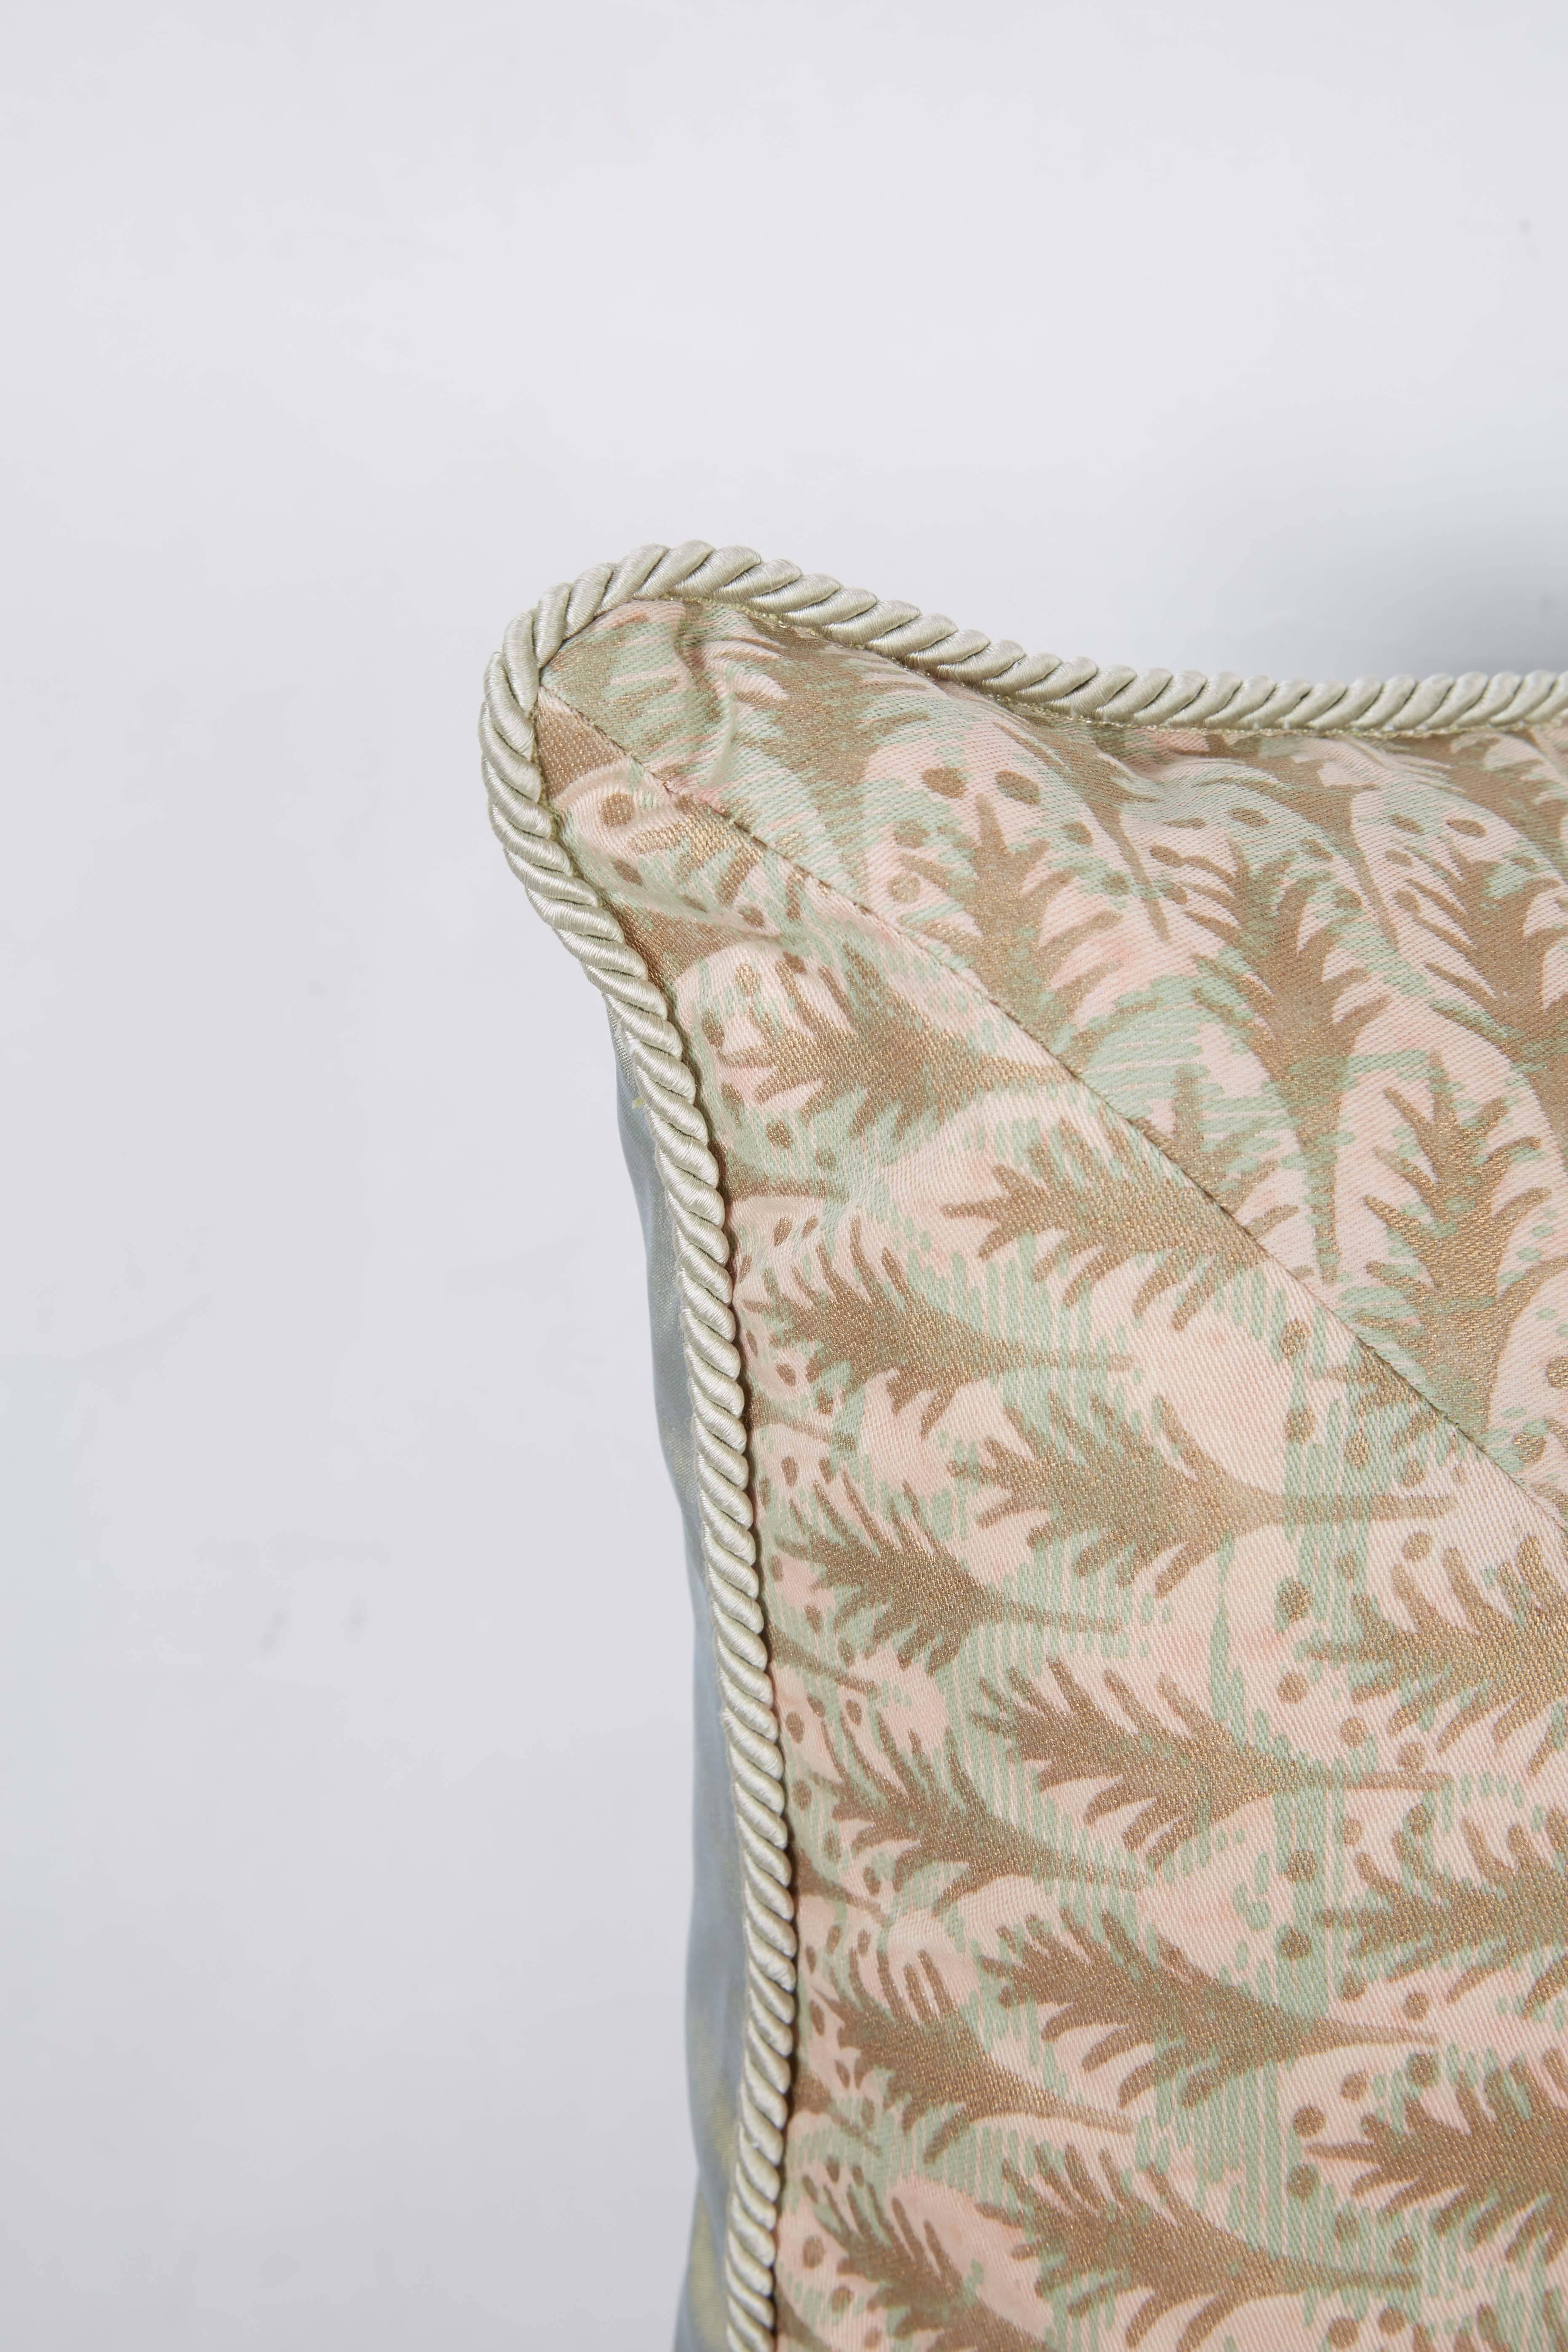 Contemporary A Pair of Mitered Fortuny Fabric Cushions in the Puimette Pattern